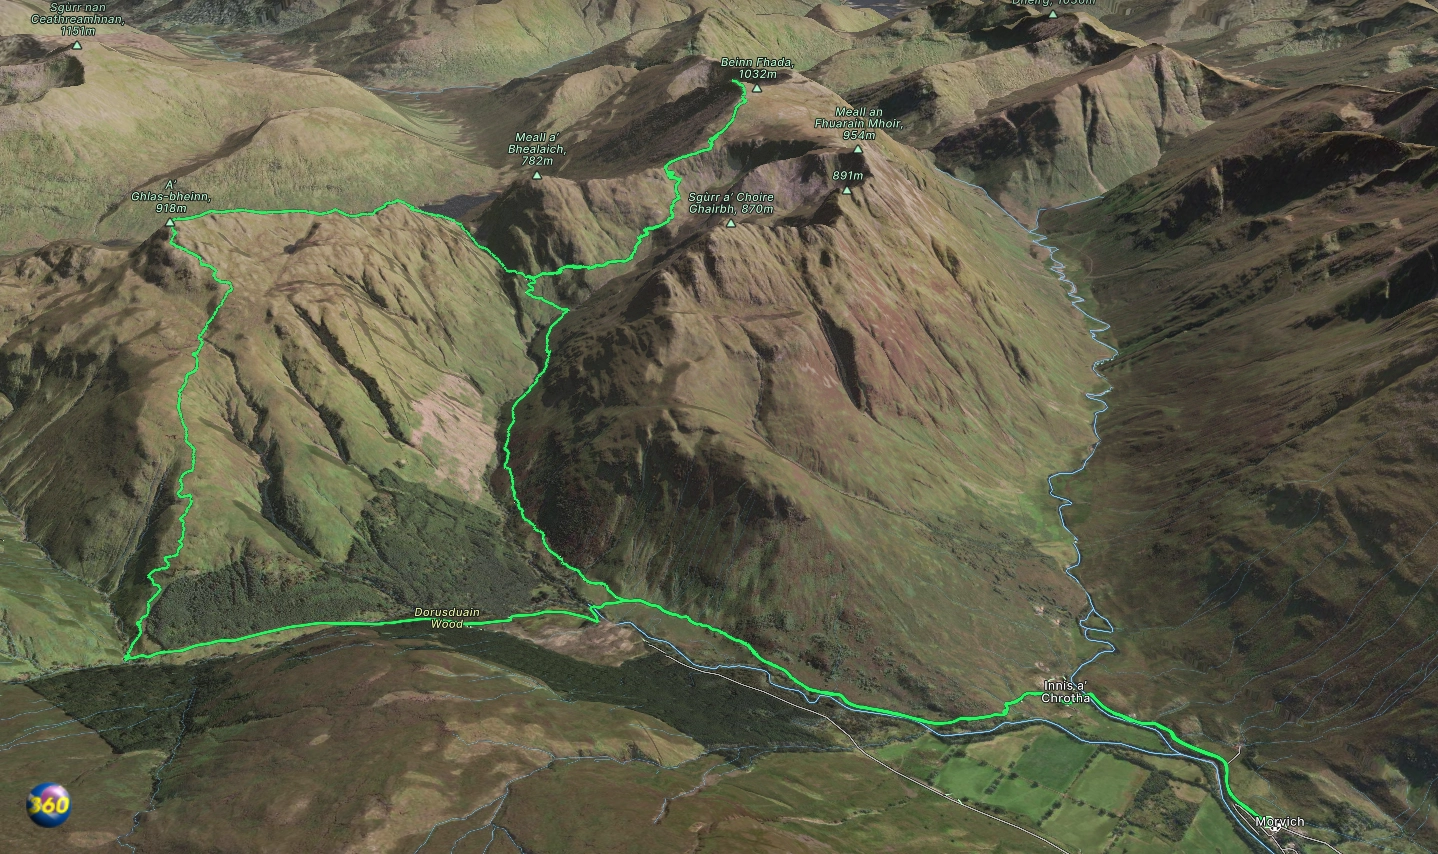 3D IMAGE OF THE MUNROS